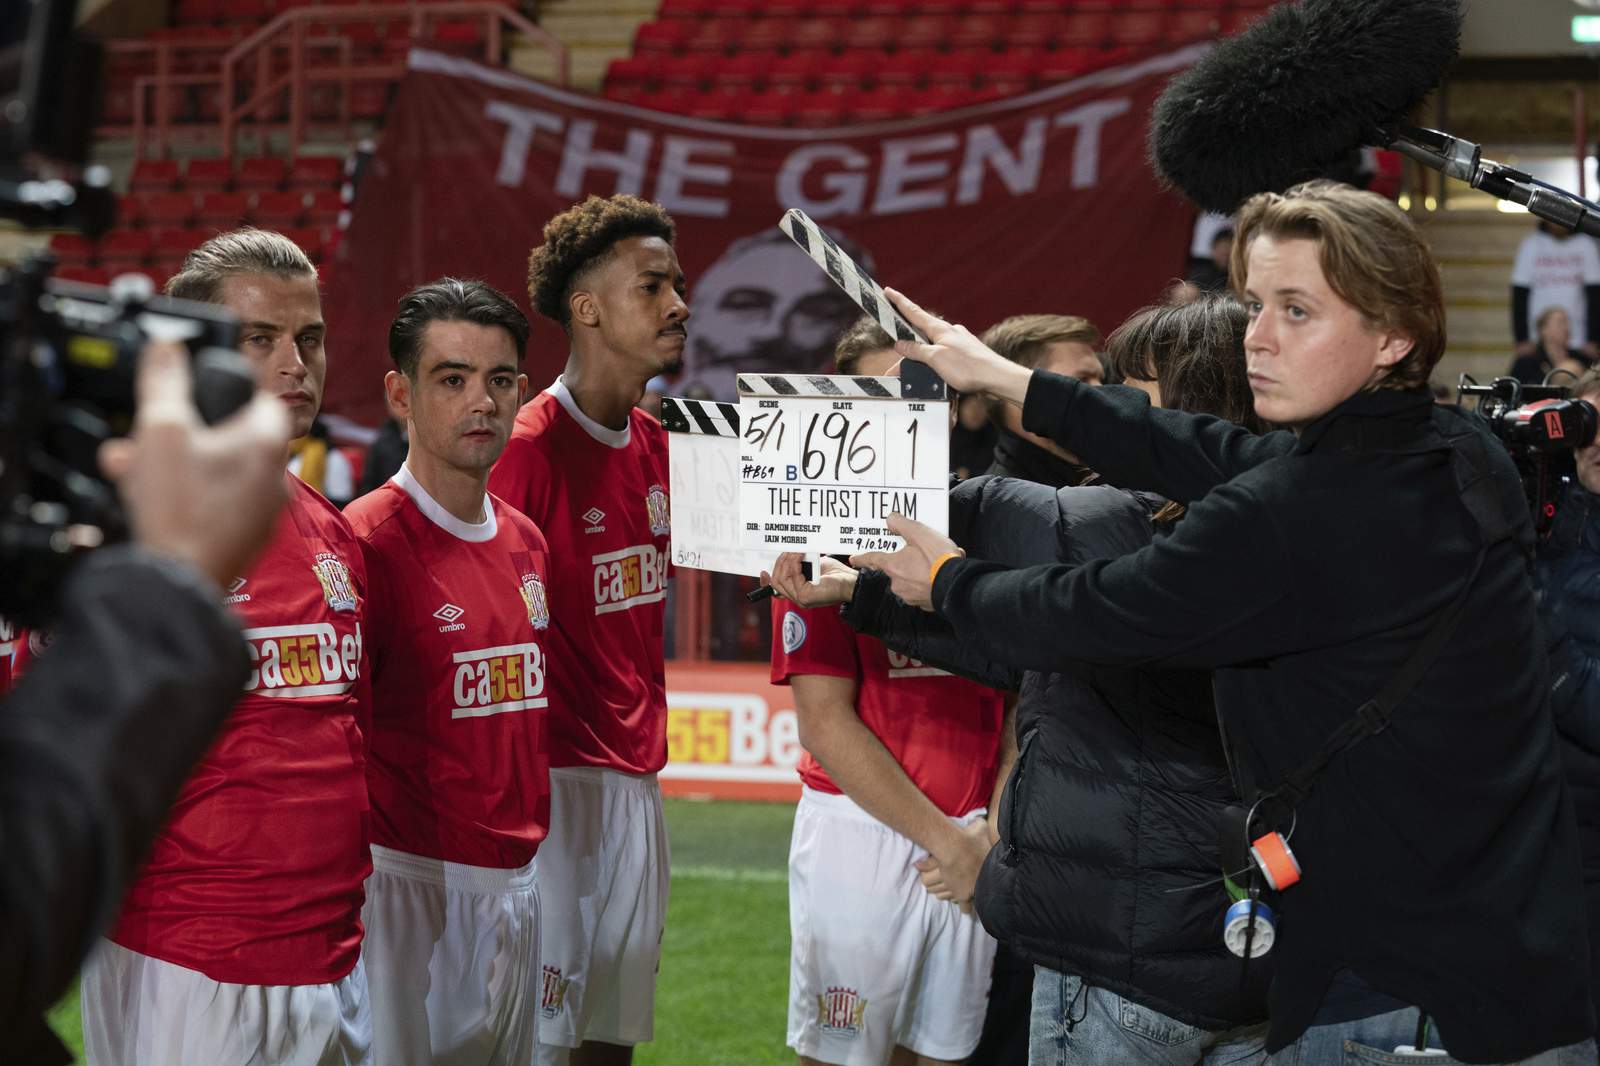 Soccer gets comedy series treatment with help from Liverpool